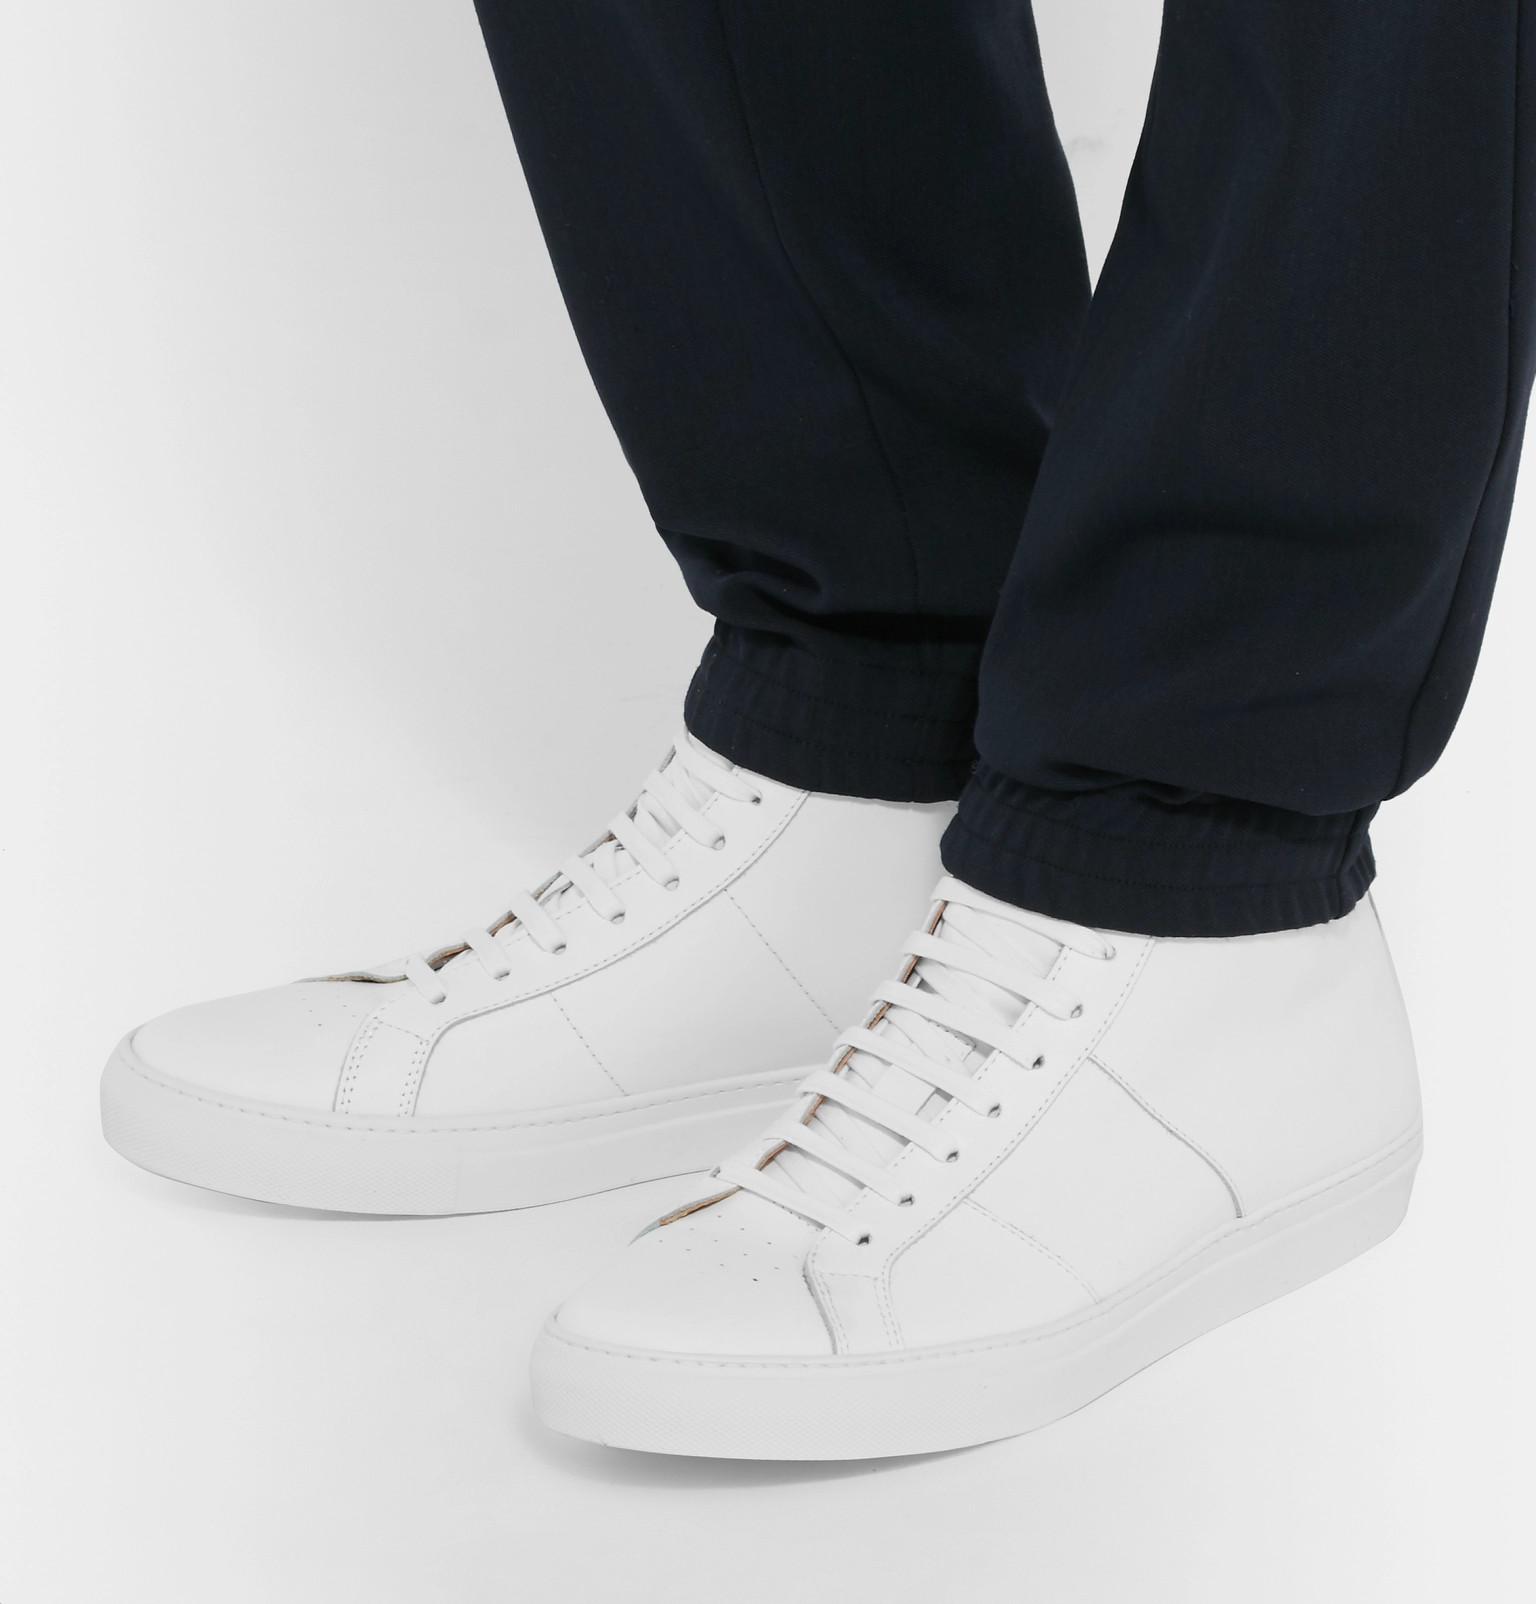 GREATS The Royale Leather High-top Sneakers in White for Men - Lyst